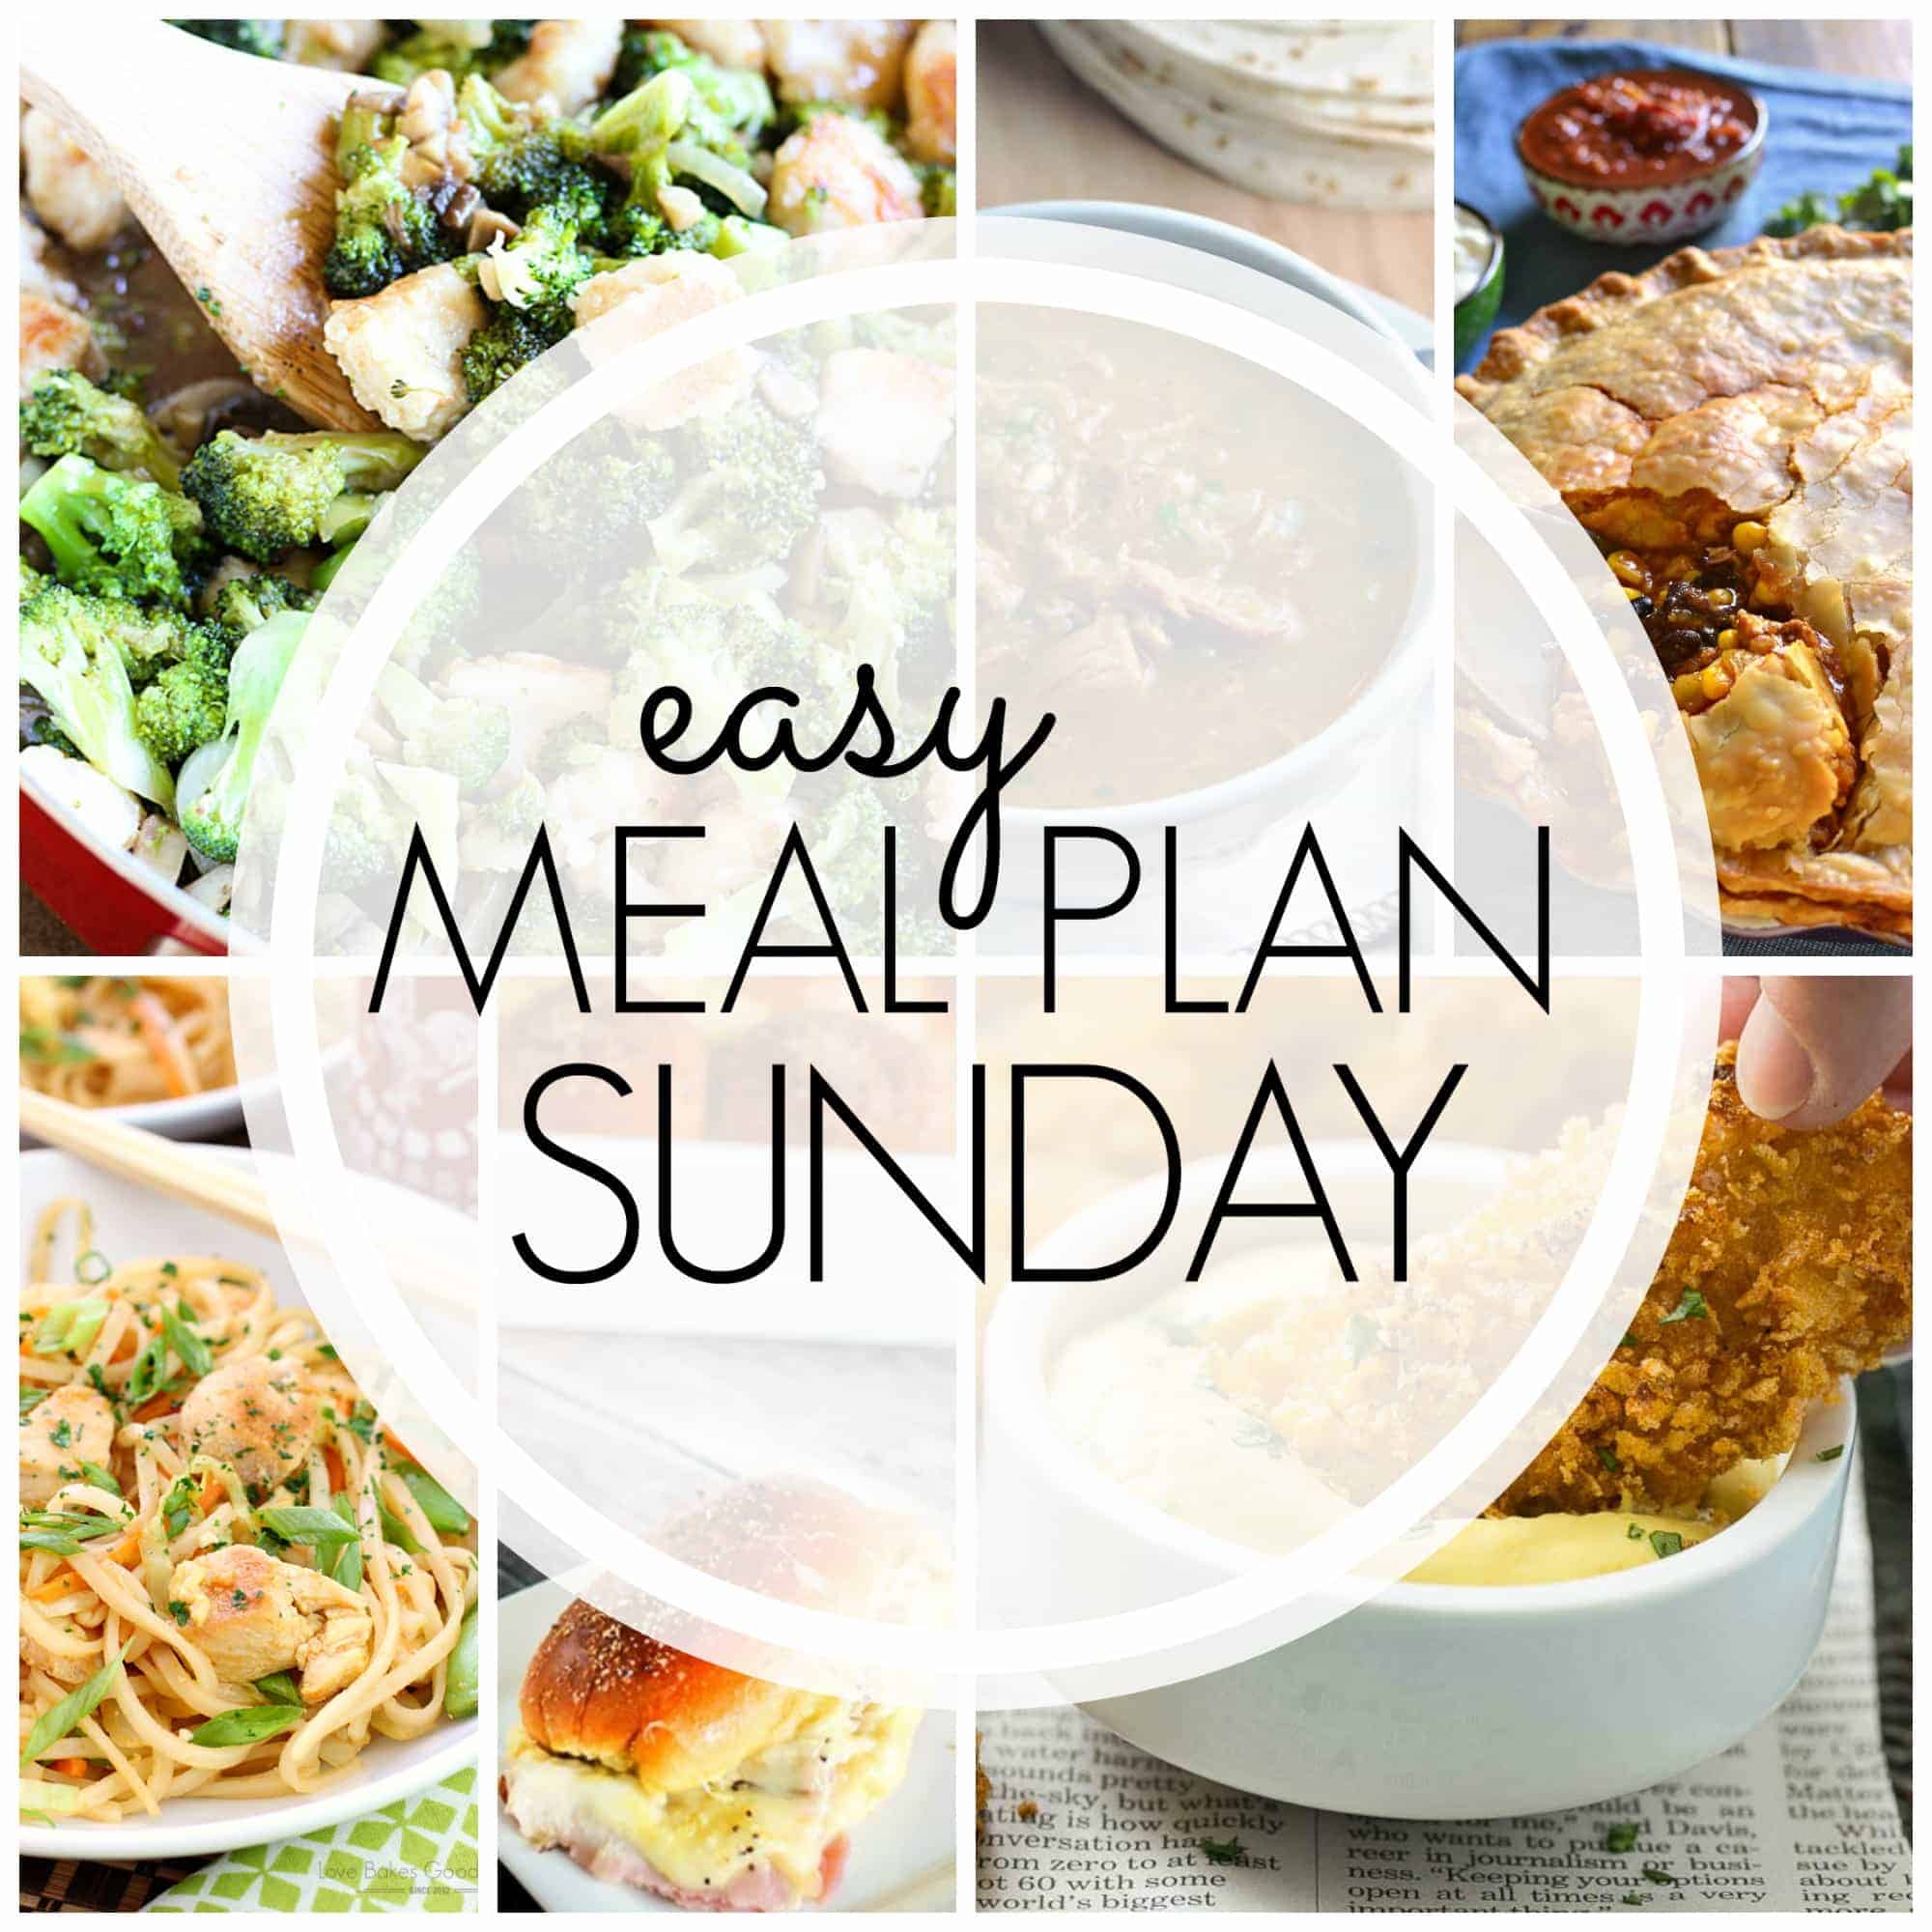 With Easy Meal Plan Sunday Week 71 - six dinners, two desserts and a breakfast recipe will help you remove the guesswork from this week's meal planning.